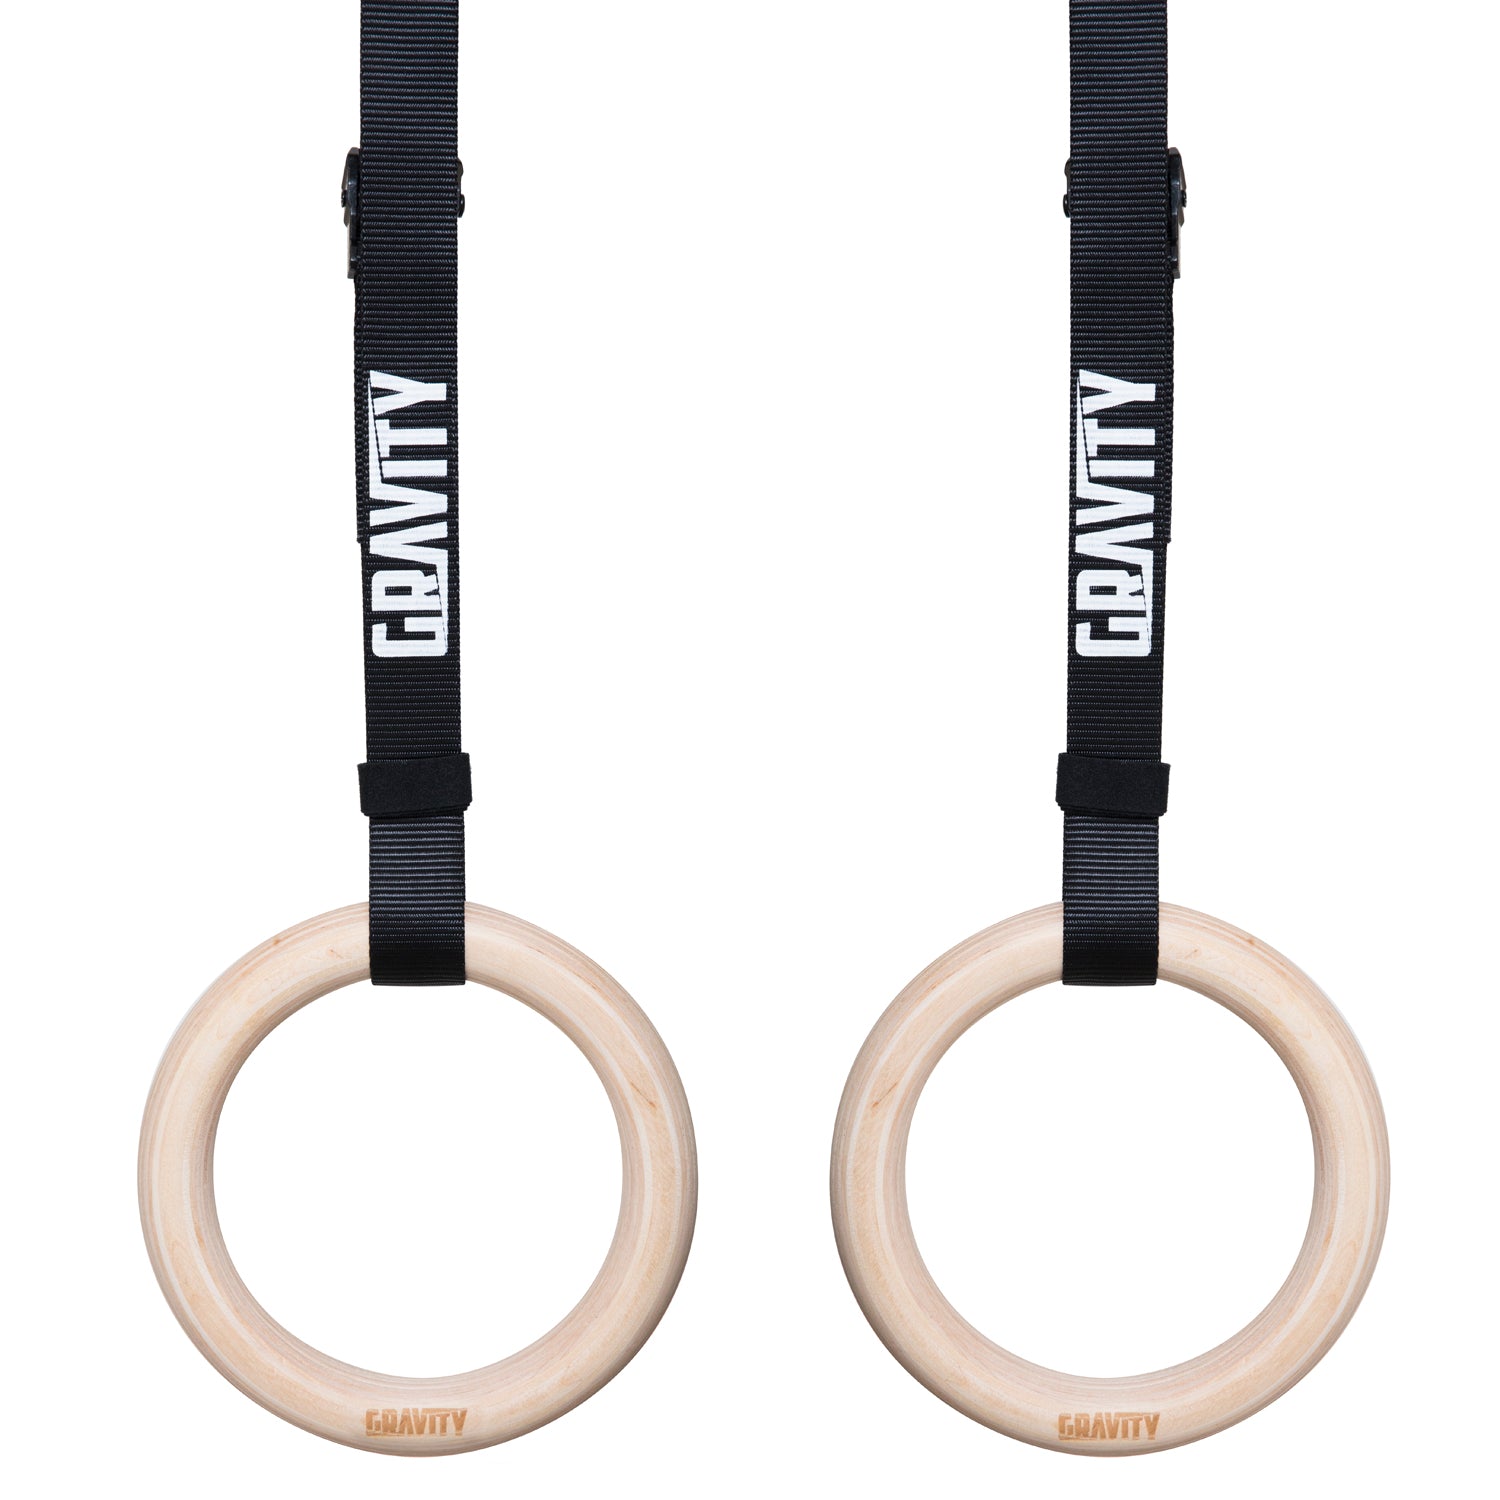 Gravity Fitness Wooden Gymnastic Rings - Fitness Equipment